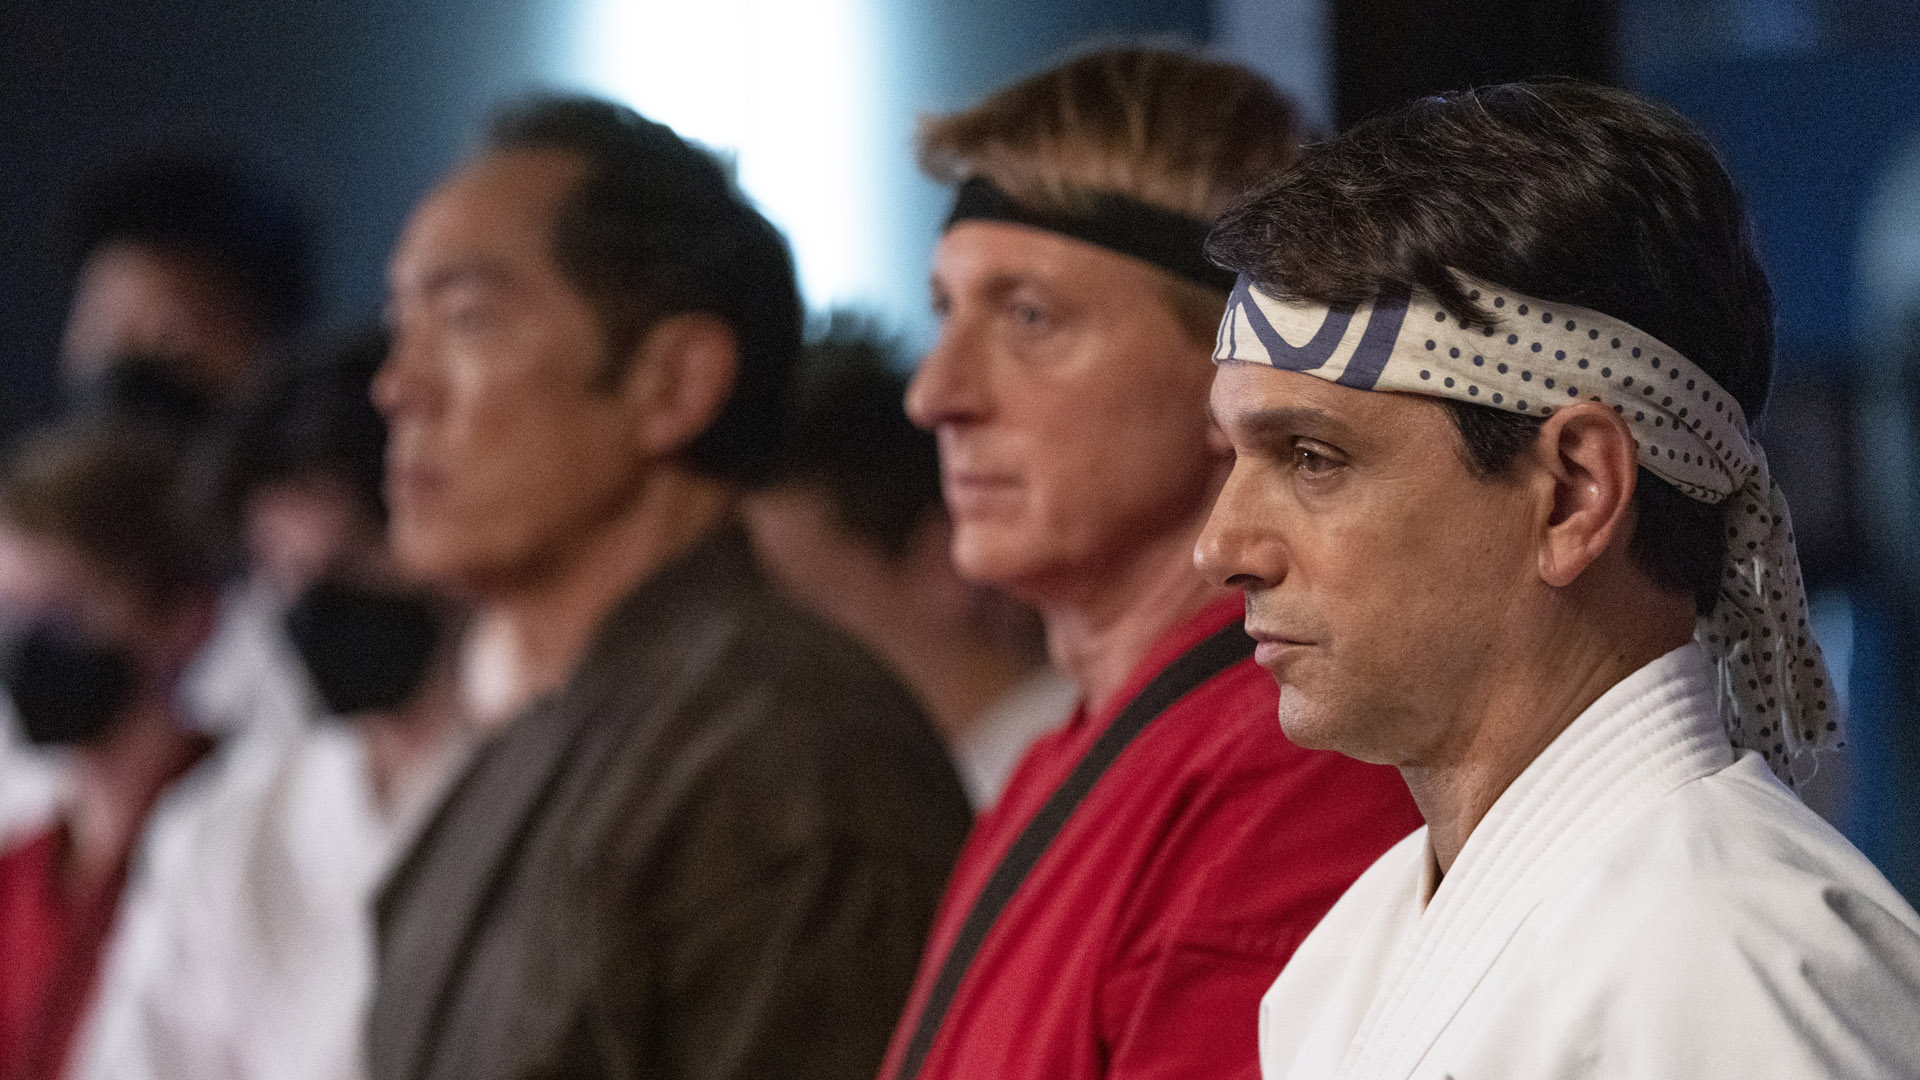 Chozen, Johnny, and Danny stand next to each other in Cobra Kai season 5